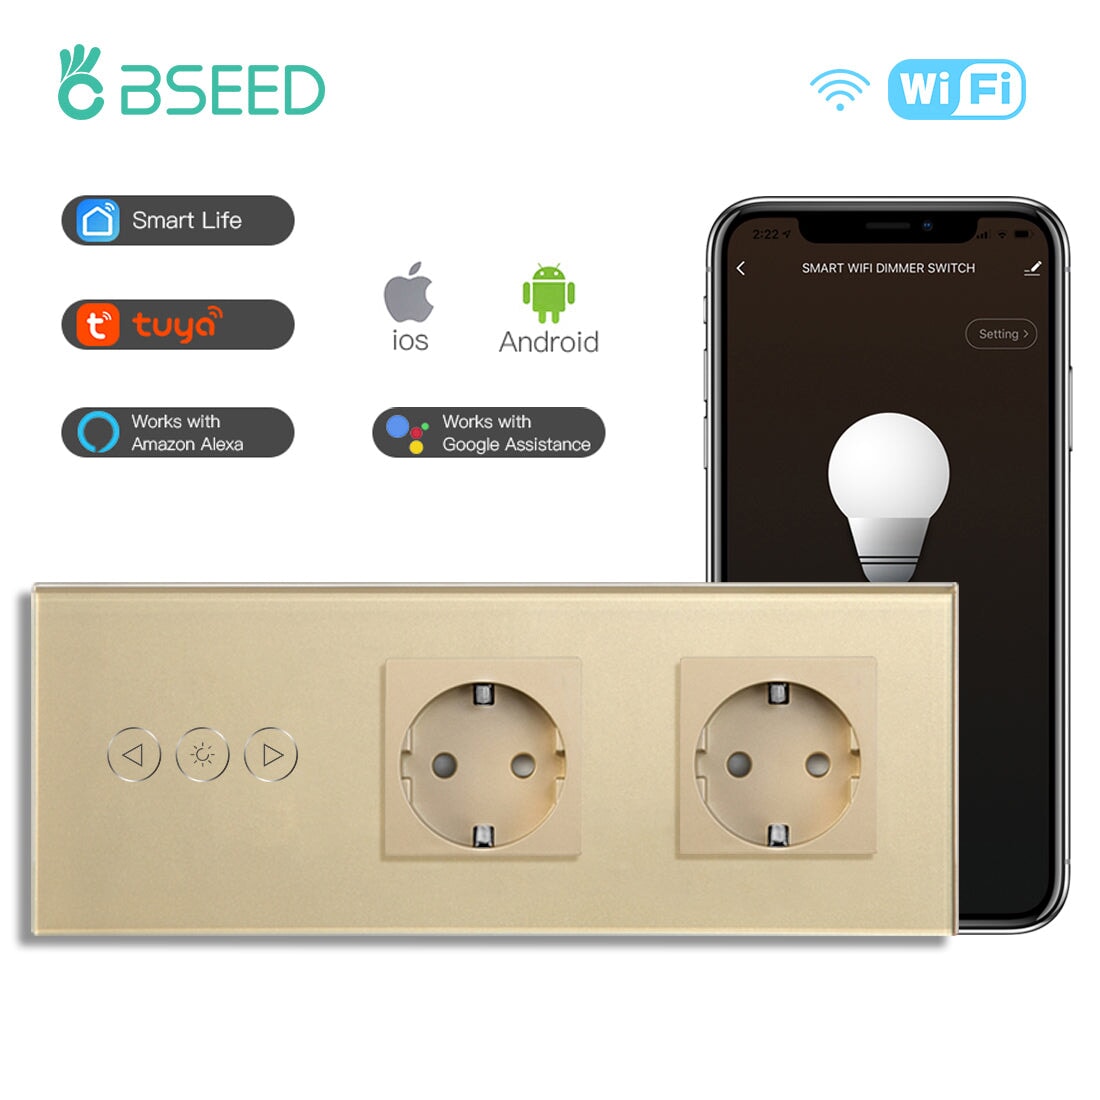 Bseed Smart WiFi Dimmer Switches With Normal EU Standard Wall Sockets 228mm Light Switches Bseedswitch Golden 